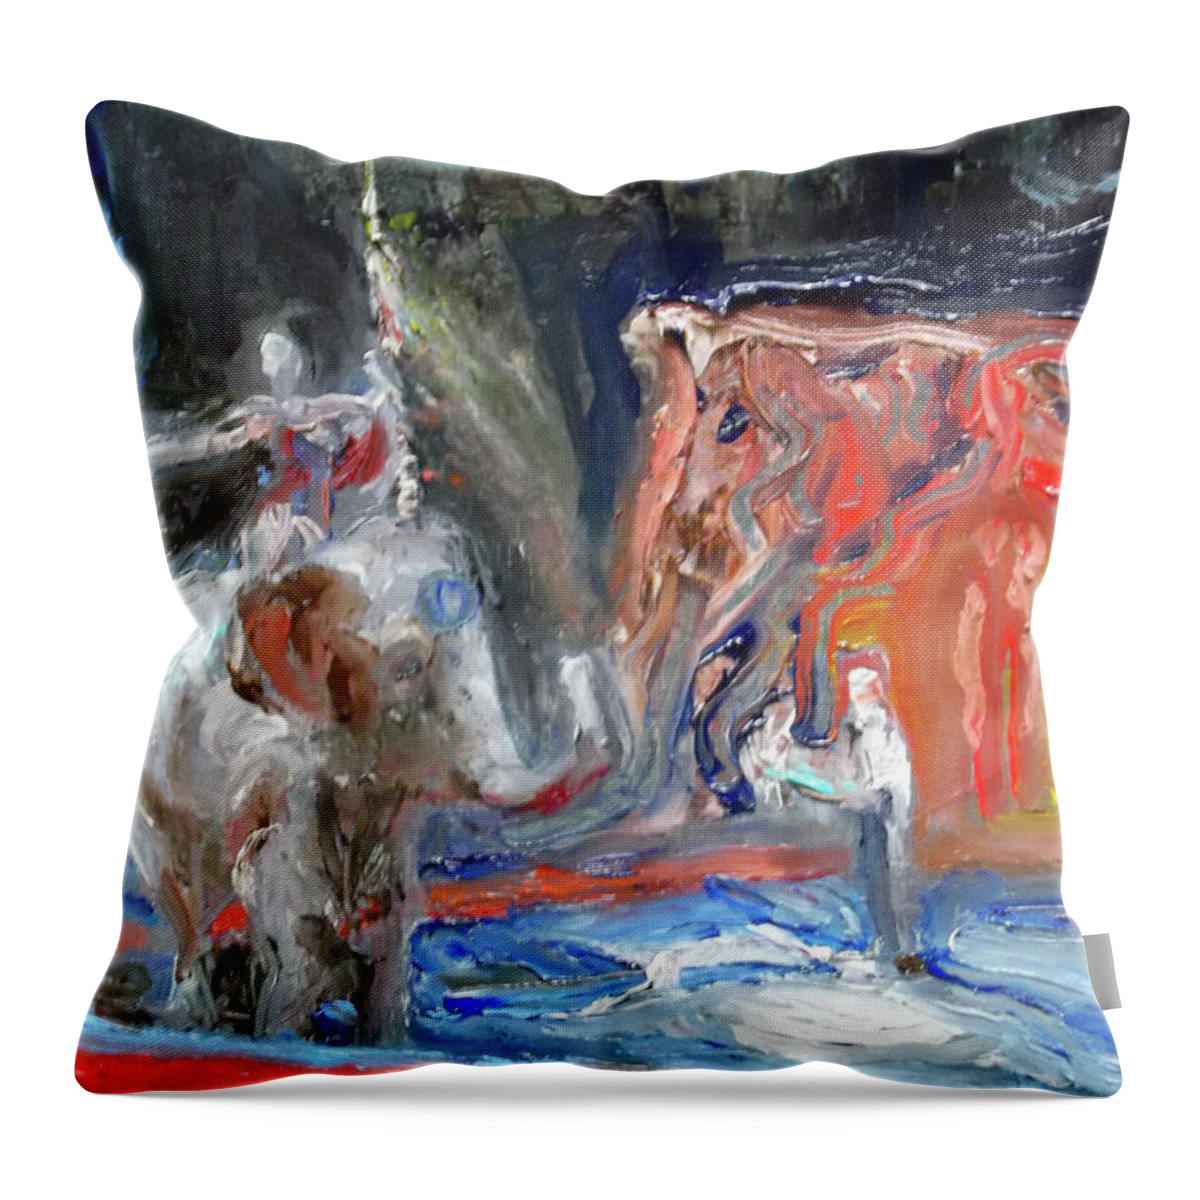 Elephant Throw Pillow featuring the painting The Final Curtain by Susan Esbensen